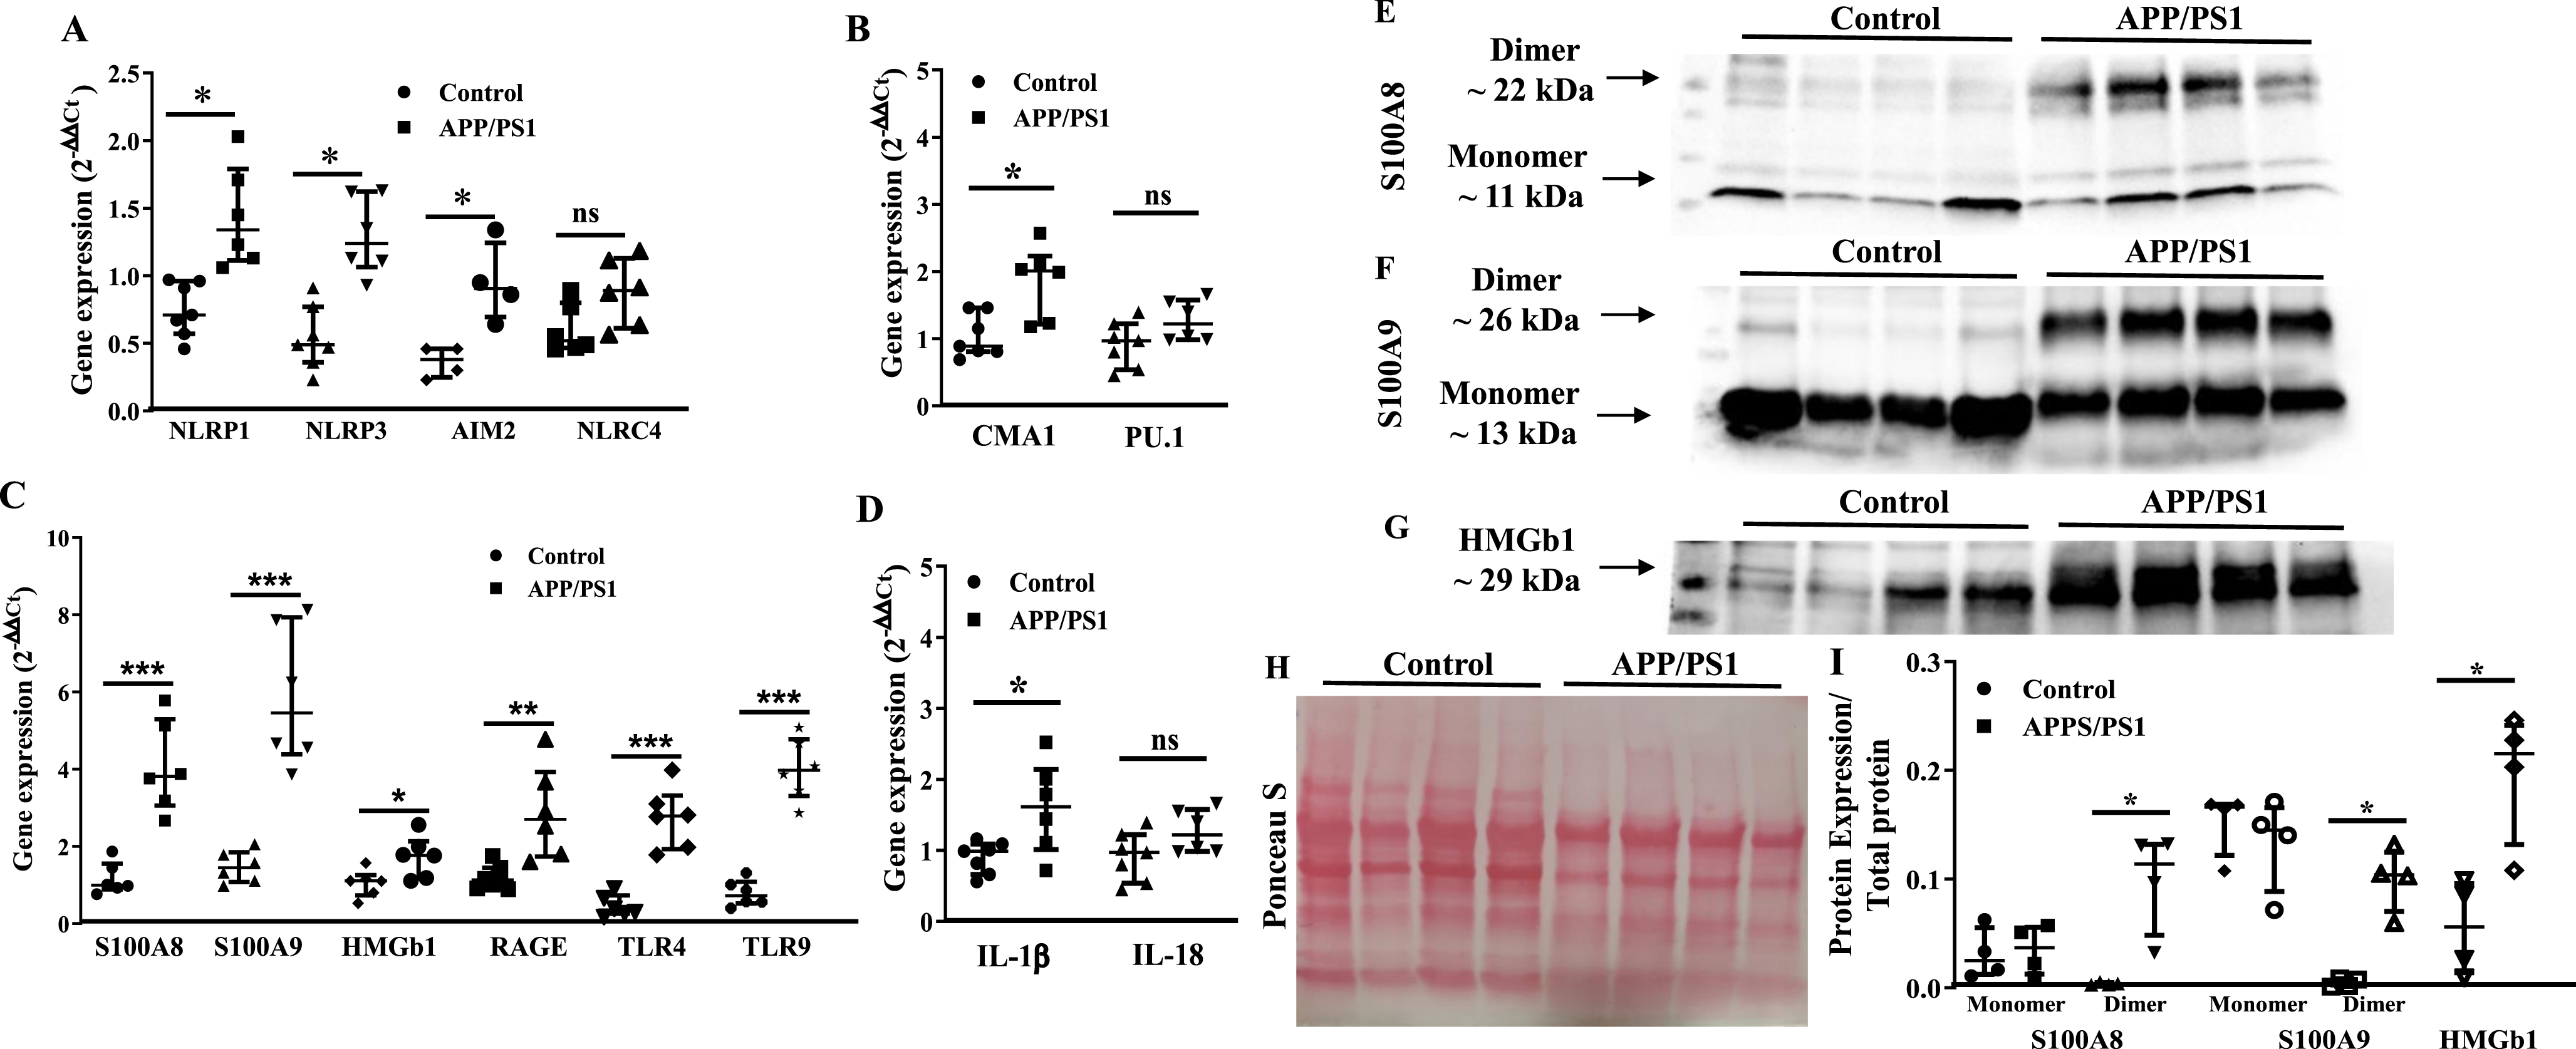 Increased expression of pro-myelopoietic/pro-inflammatory factors in the bone marrow hematopoietic stem/progenitor cells (HSPCs) of APP/PS1 mice. A– D) Gene expression was normalized to the β-actin. The relative gene expression was higher for NLRP1 (*p < 0.05), NLRP3 (*p < 0.05), and AIM2 (*p < 0.05) (A), CMA1 (*p < 0.05) (B), S100A8 (*p < 0.001), S100A9 (*p < 0.001), HMGb1 (*p < 0.05), RAGE (*p < 0.01), TLR4 (*p < 0.001), and TLR9 (*p < 0.001) (C) and IL1β (*p < 0.05) (D) in the HSPCs of APP/PS1 mice compare to the control while that of NLRC4 (A), PU.1 (B) and IL18 (D) were unchanged. E– G) Shown were representative optical density images of western blots of S100A8 (E), S100A9 (F), and HMGb1 and the Ponceau S staining of total protein (G) in the bone marrow supernatants. I) Protein expression of the dimers of S100A8 or S100A9 and HMGb1 was higher (*p < 0.05, n = 4) in the BM-supernatants of APP/PS1 mice compared to that of control while the protein levels of the monomers were unchanged. Data sets were analyzed by using Mann-Whitney test.